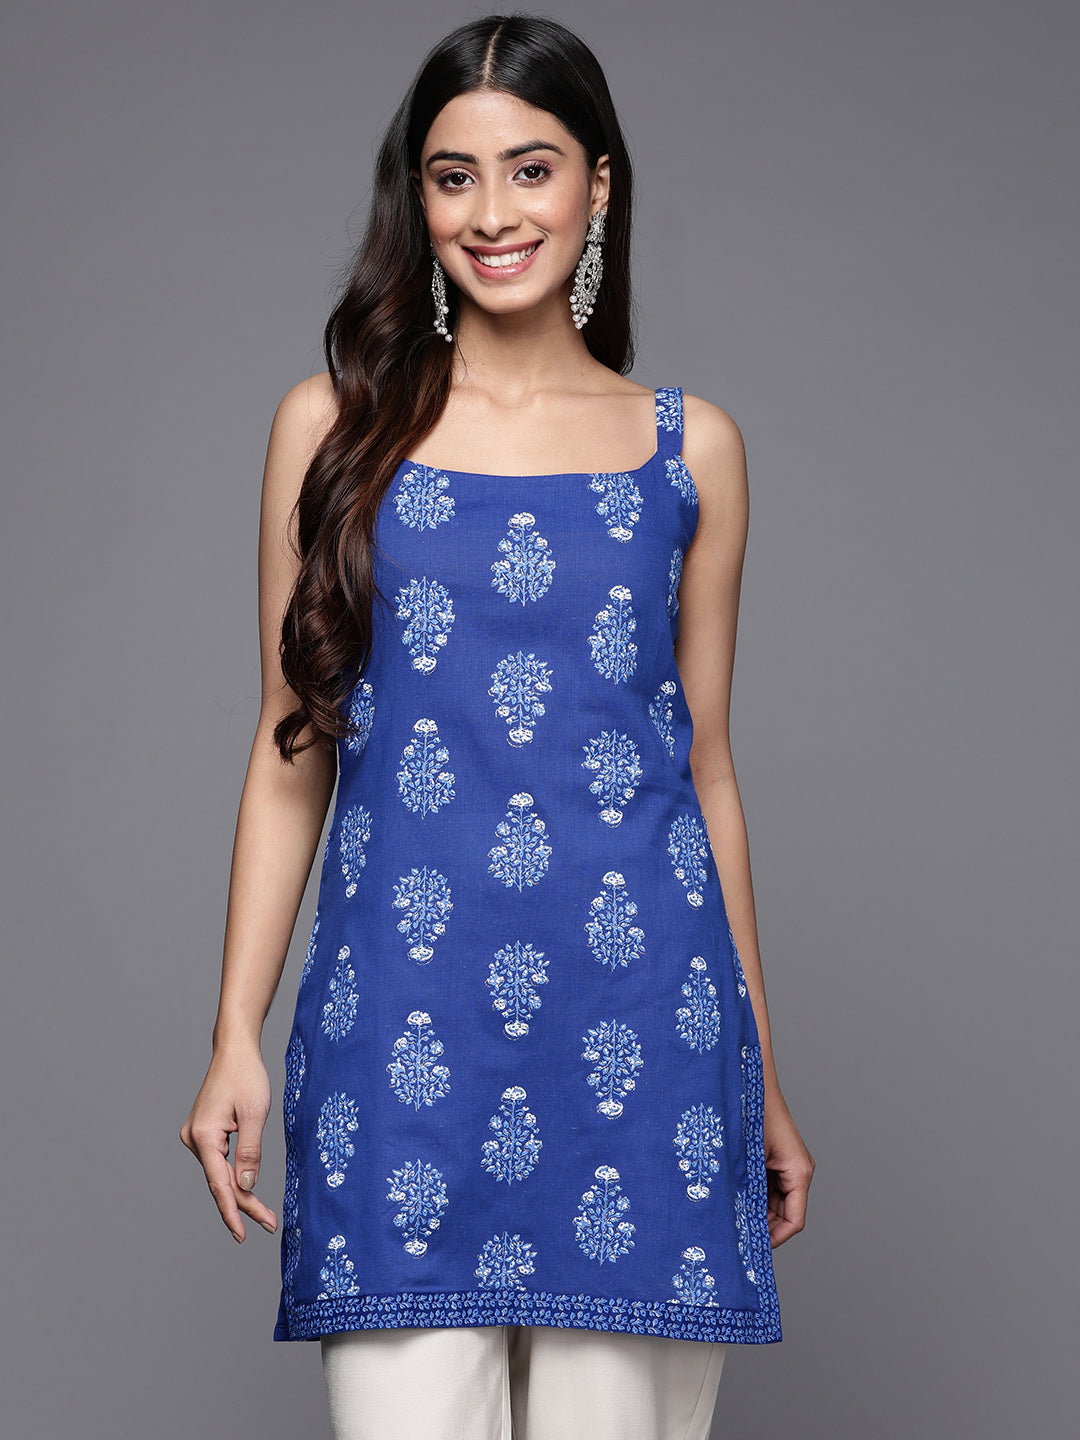 Blue & White Floral Printed Pure Cotton Tunic